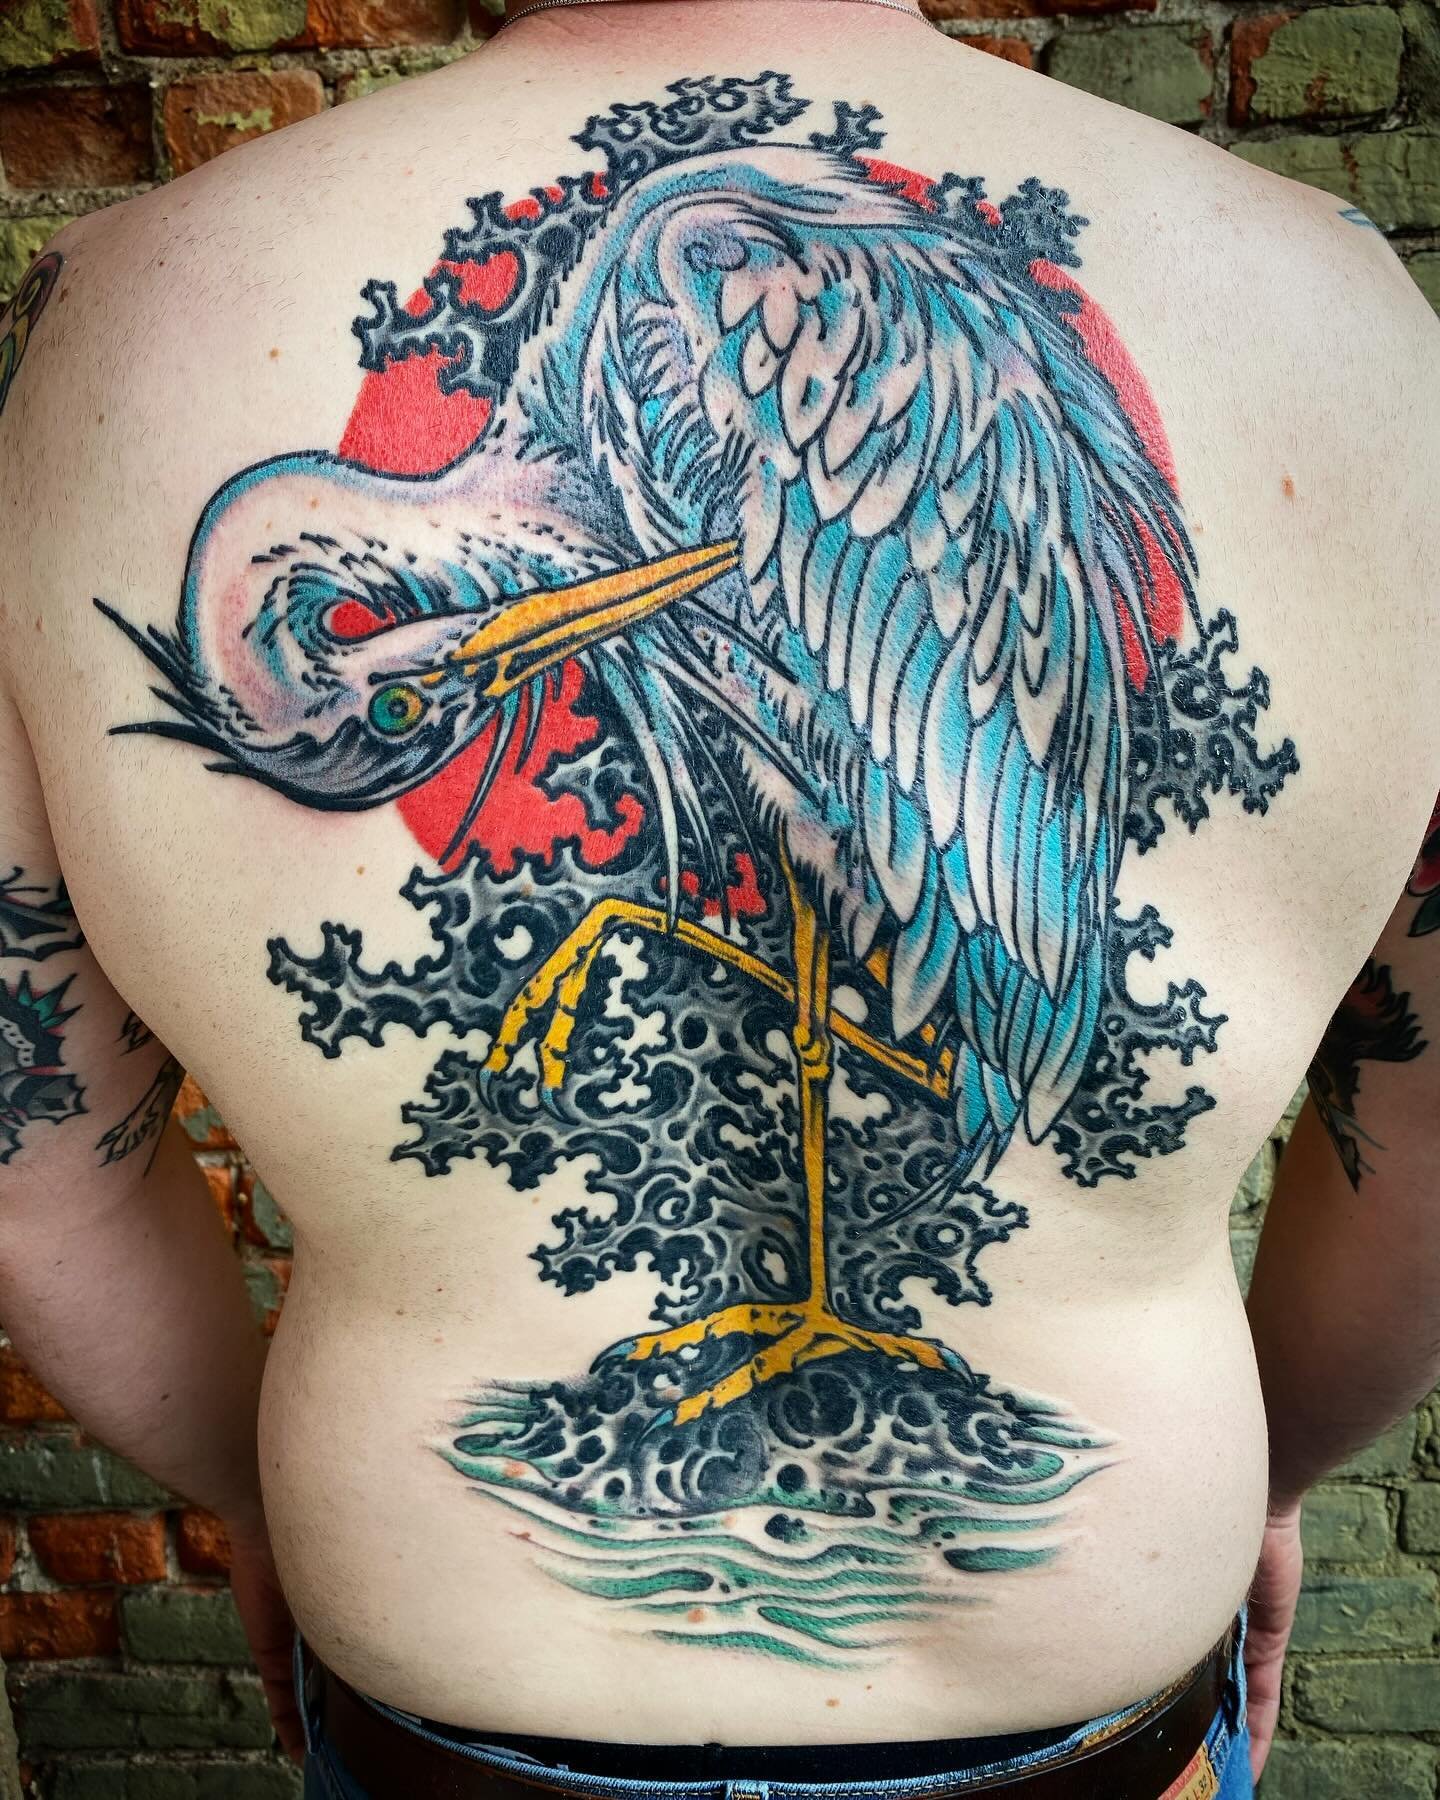 Finished up Ryan&rsquo;s back yesterday. This was a fun project based on parameters of sessions size and content. Thanks for the support 🙏